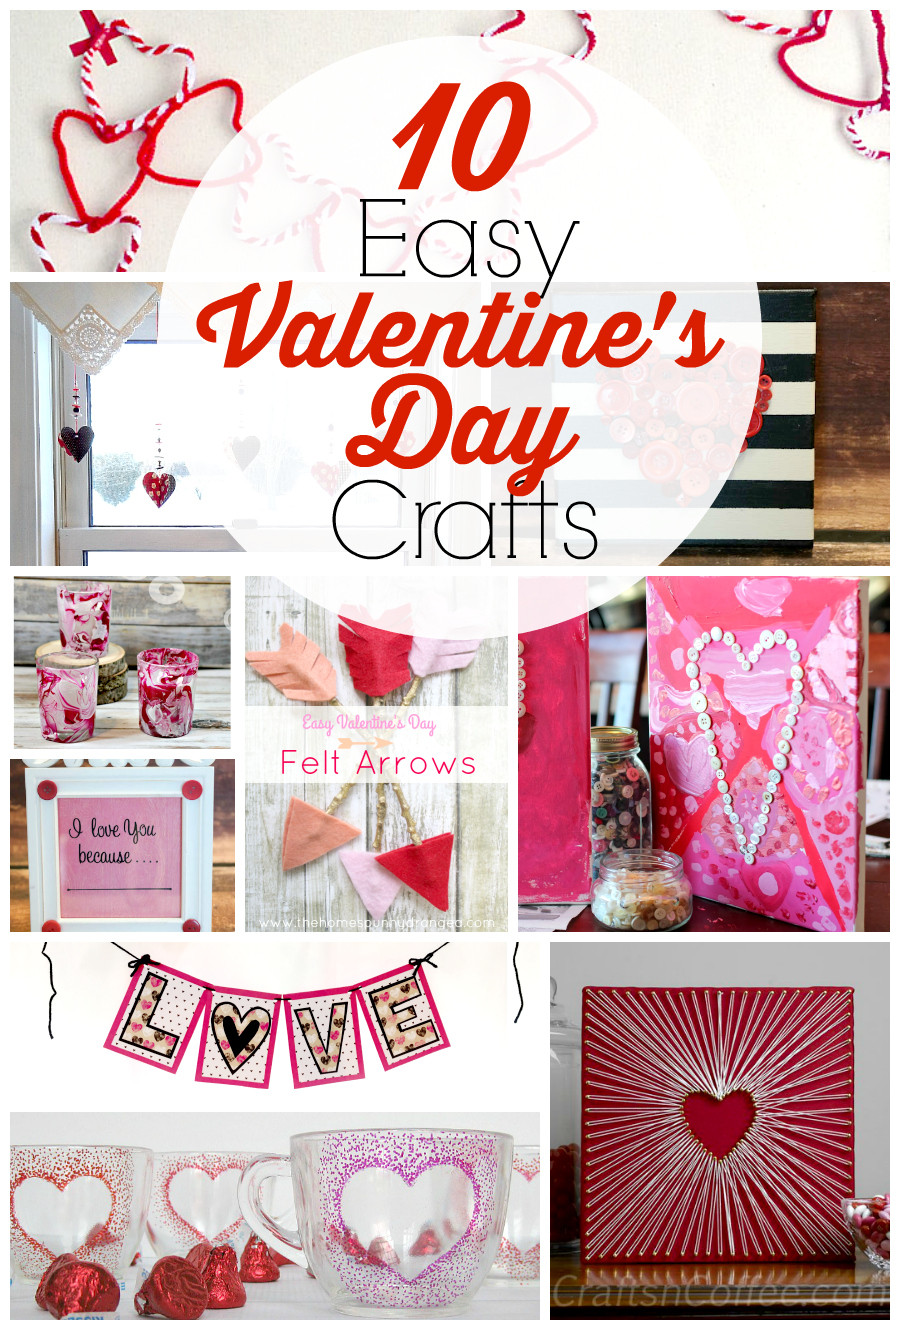 Valentines Craft Ideas For Adults
 10 Easy Valentine’s Day Crafts for Adults